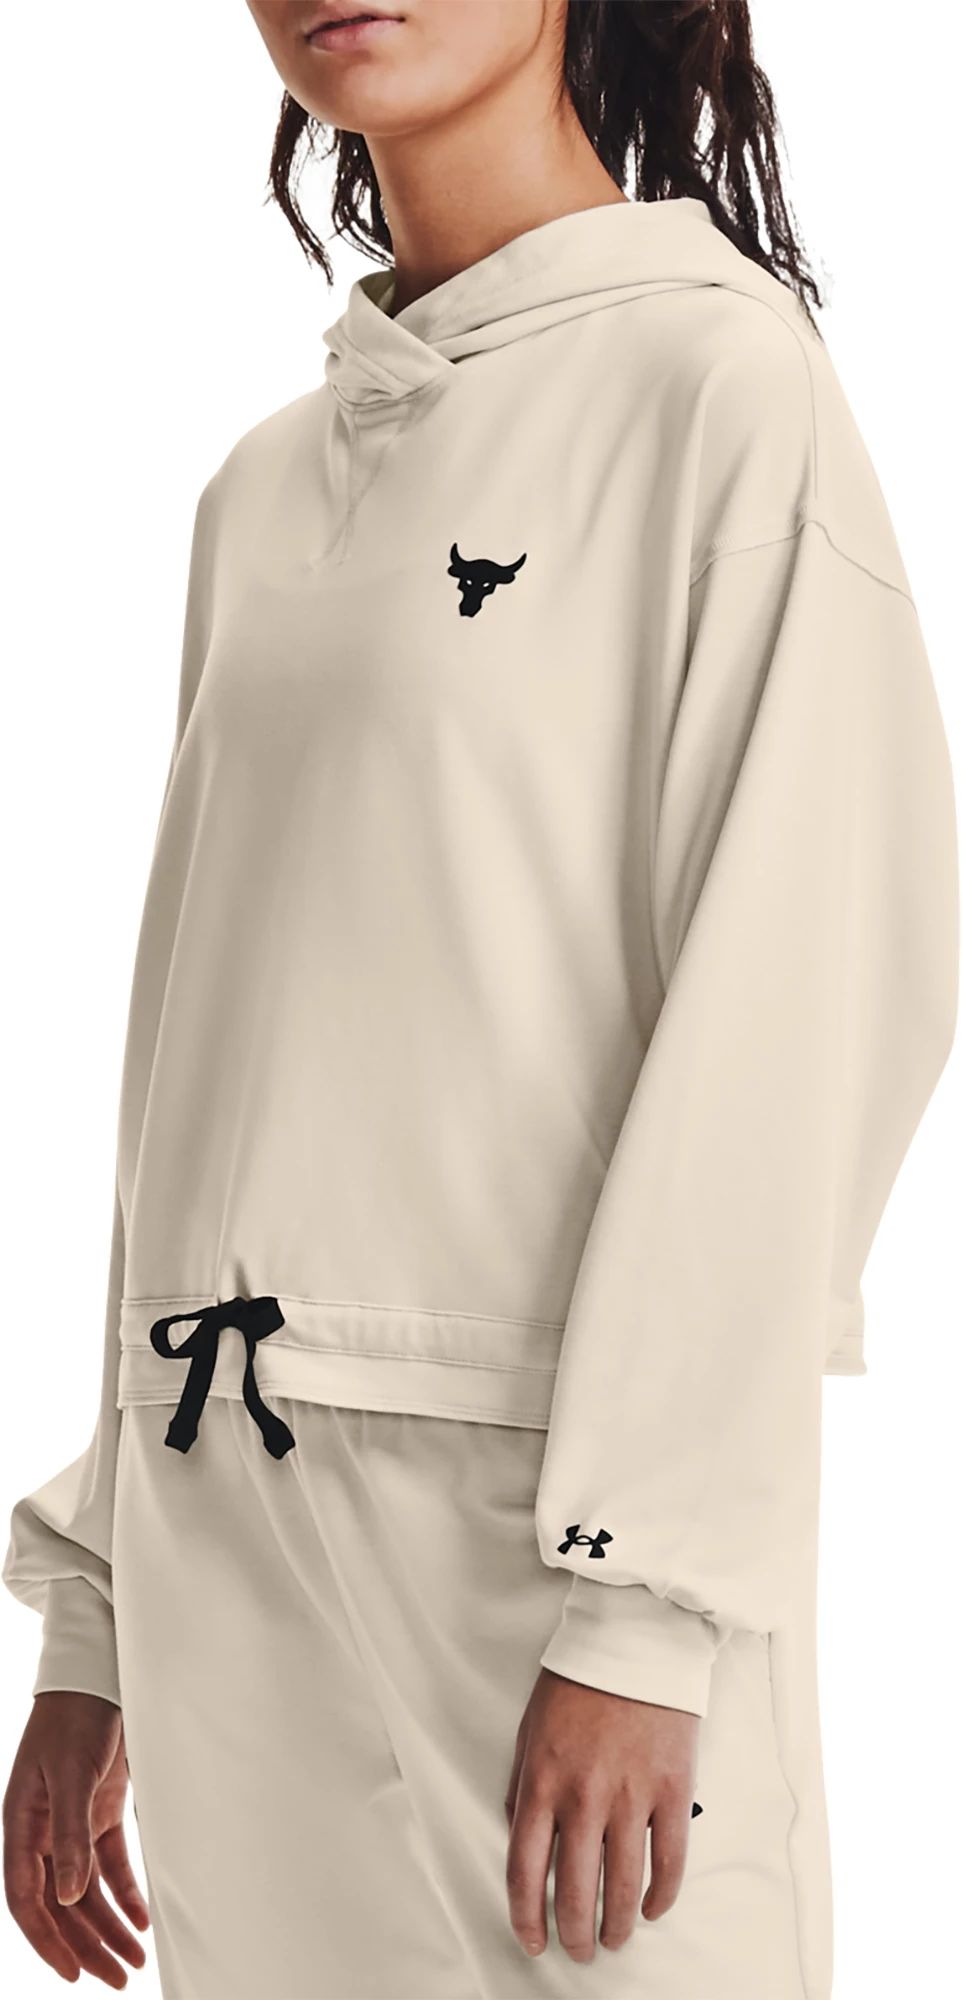 Under Armour Women's Project Rock Terry Pullover Hoodie, Small, Summit White/Black | Dick's Sporting Goods